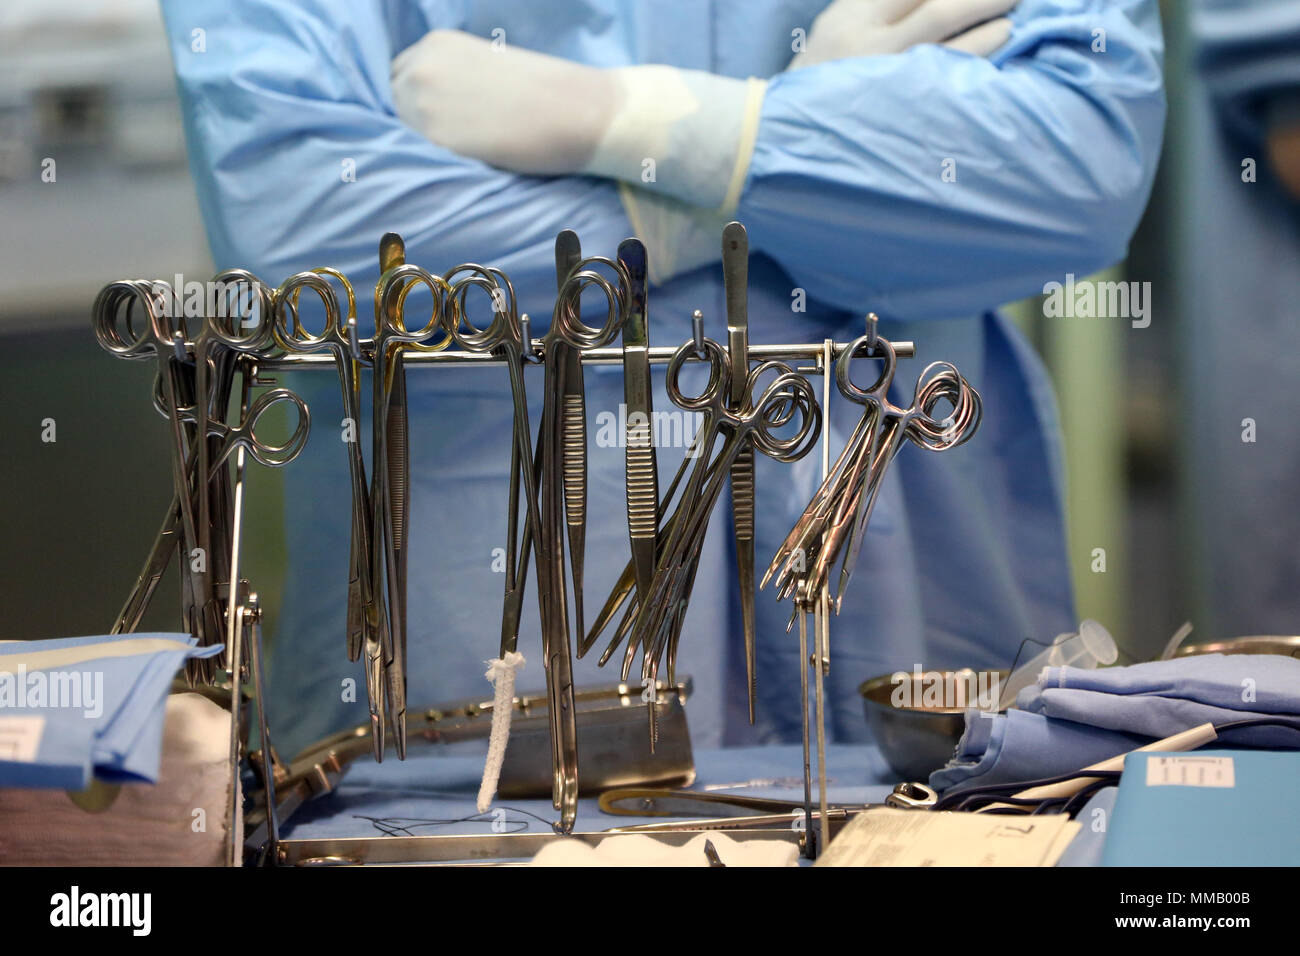 Operating theater. Cardiac surgery. Surgical instruments. Stock Photo